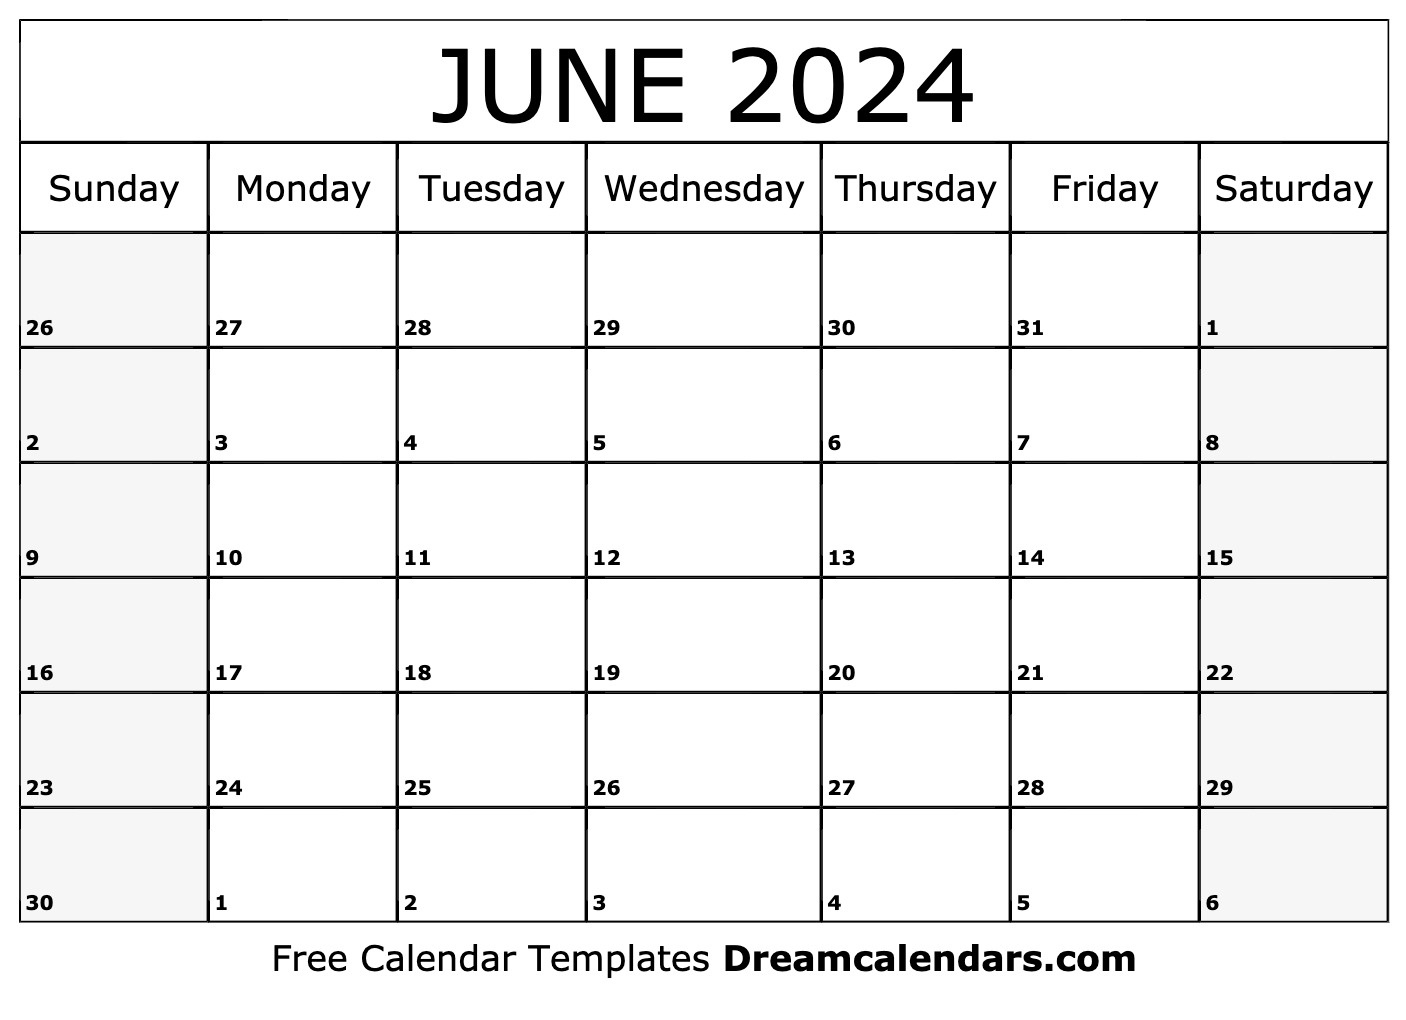 June 2024 Calendar - Free Printable With Holidays And Observances intended for June 16 2024 Calendar